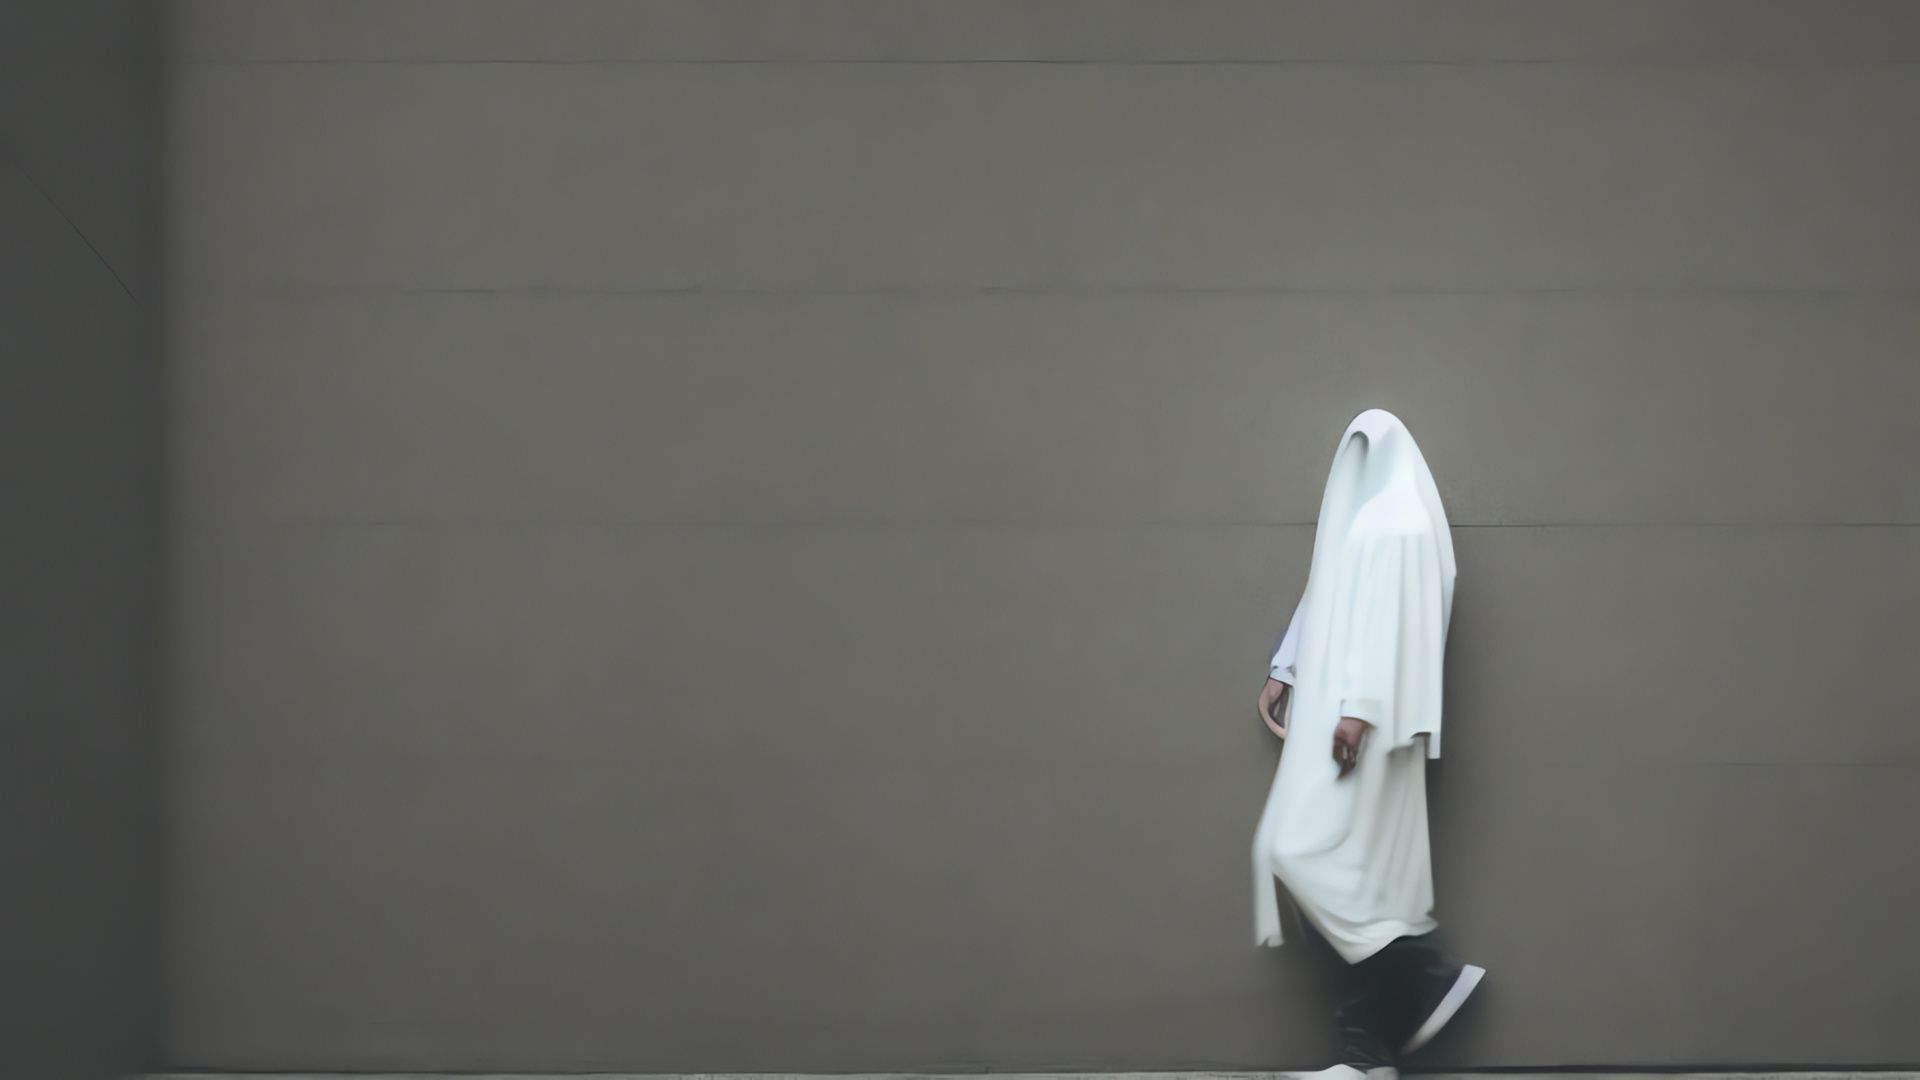 Artificial intelligence-generated image of a person, covered in a ghostly sheet, leaning against a wall.